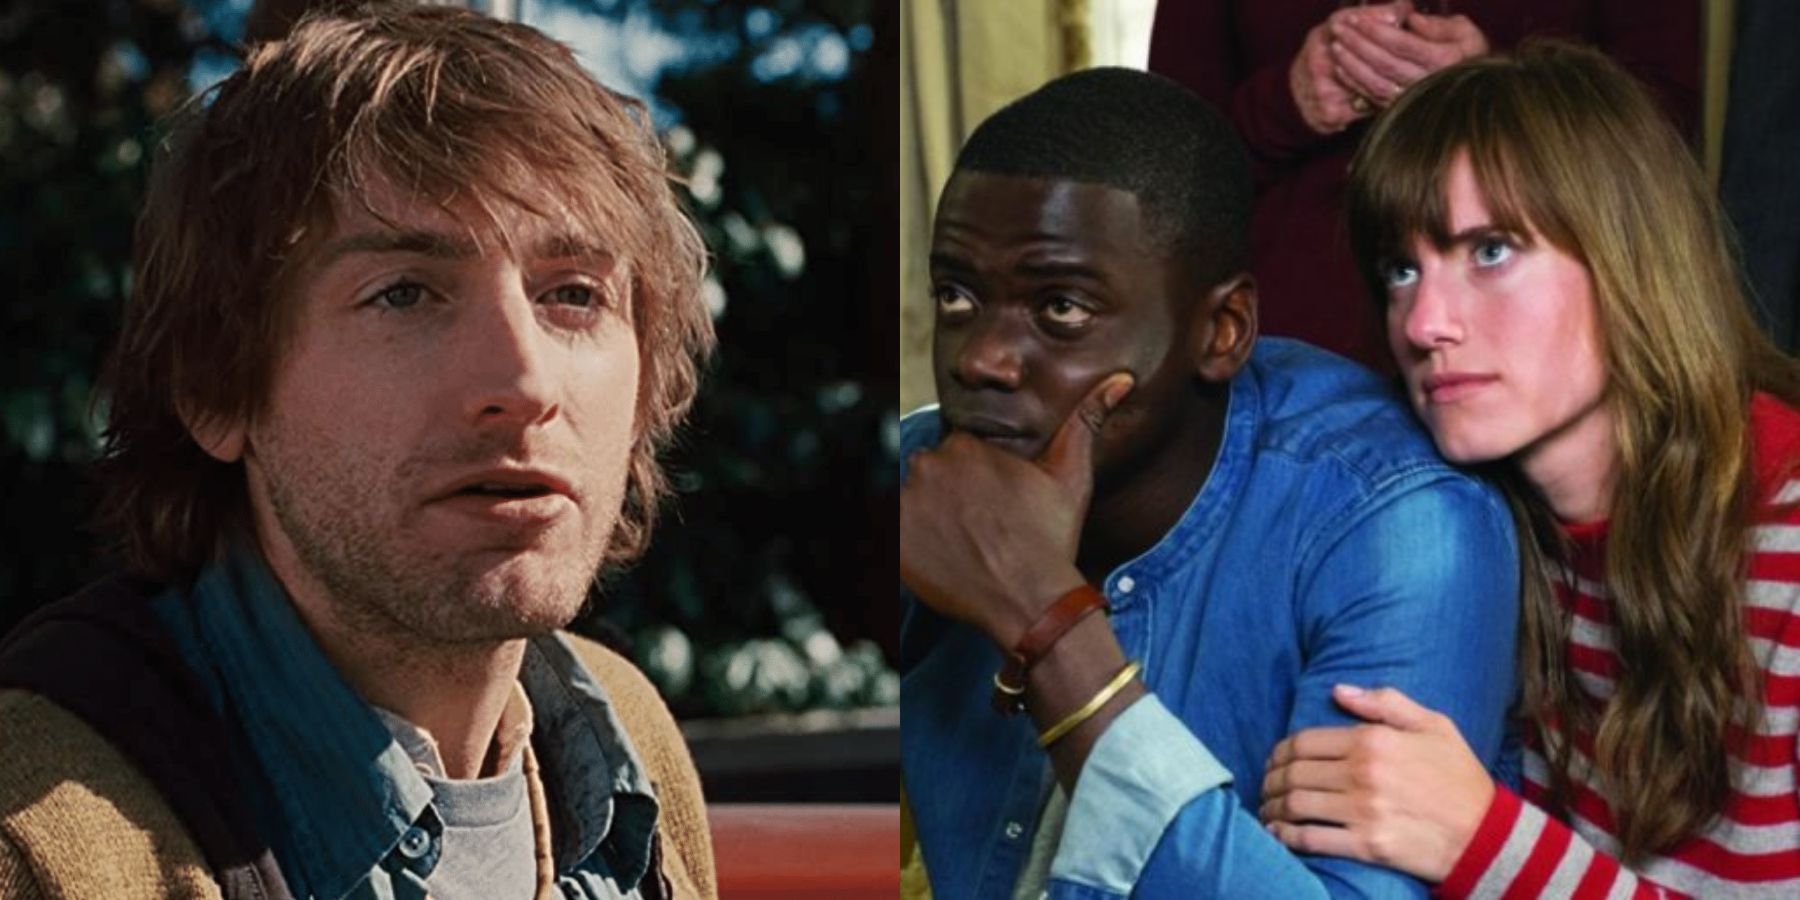 Split image of Marty (Fran Kranz) in The Cabin In The Woods and Chris (Daniel Kaluuya) and Rose (Allison Williams) in Get Out